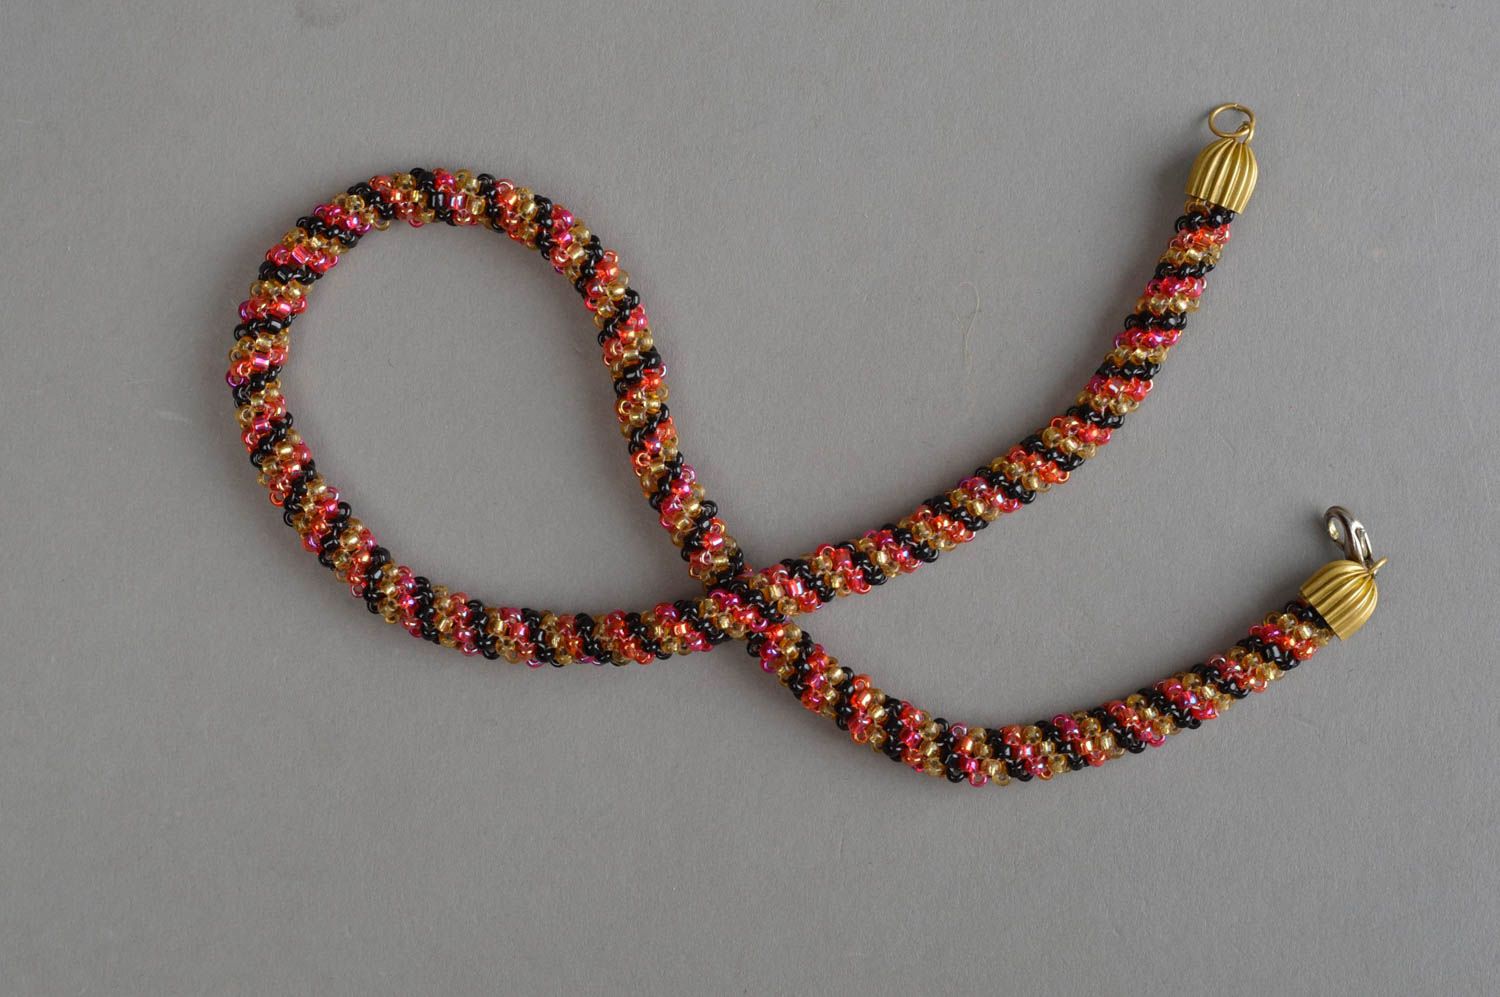 Unusual homemade beaded cord necklace evening necklace designs gifts for her photo 3